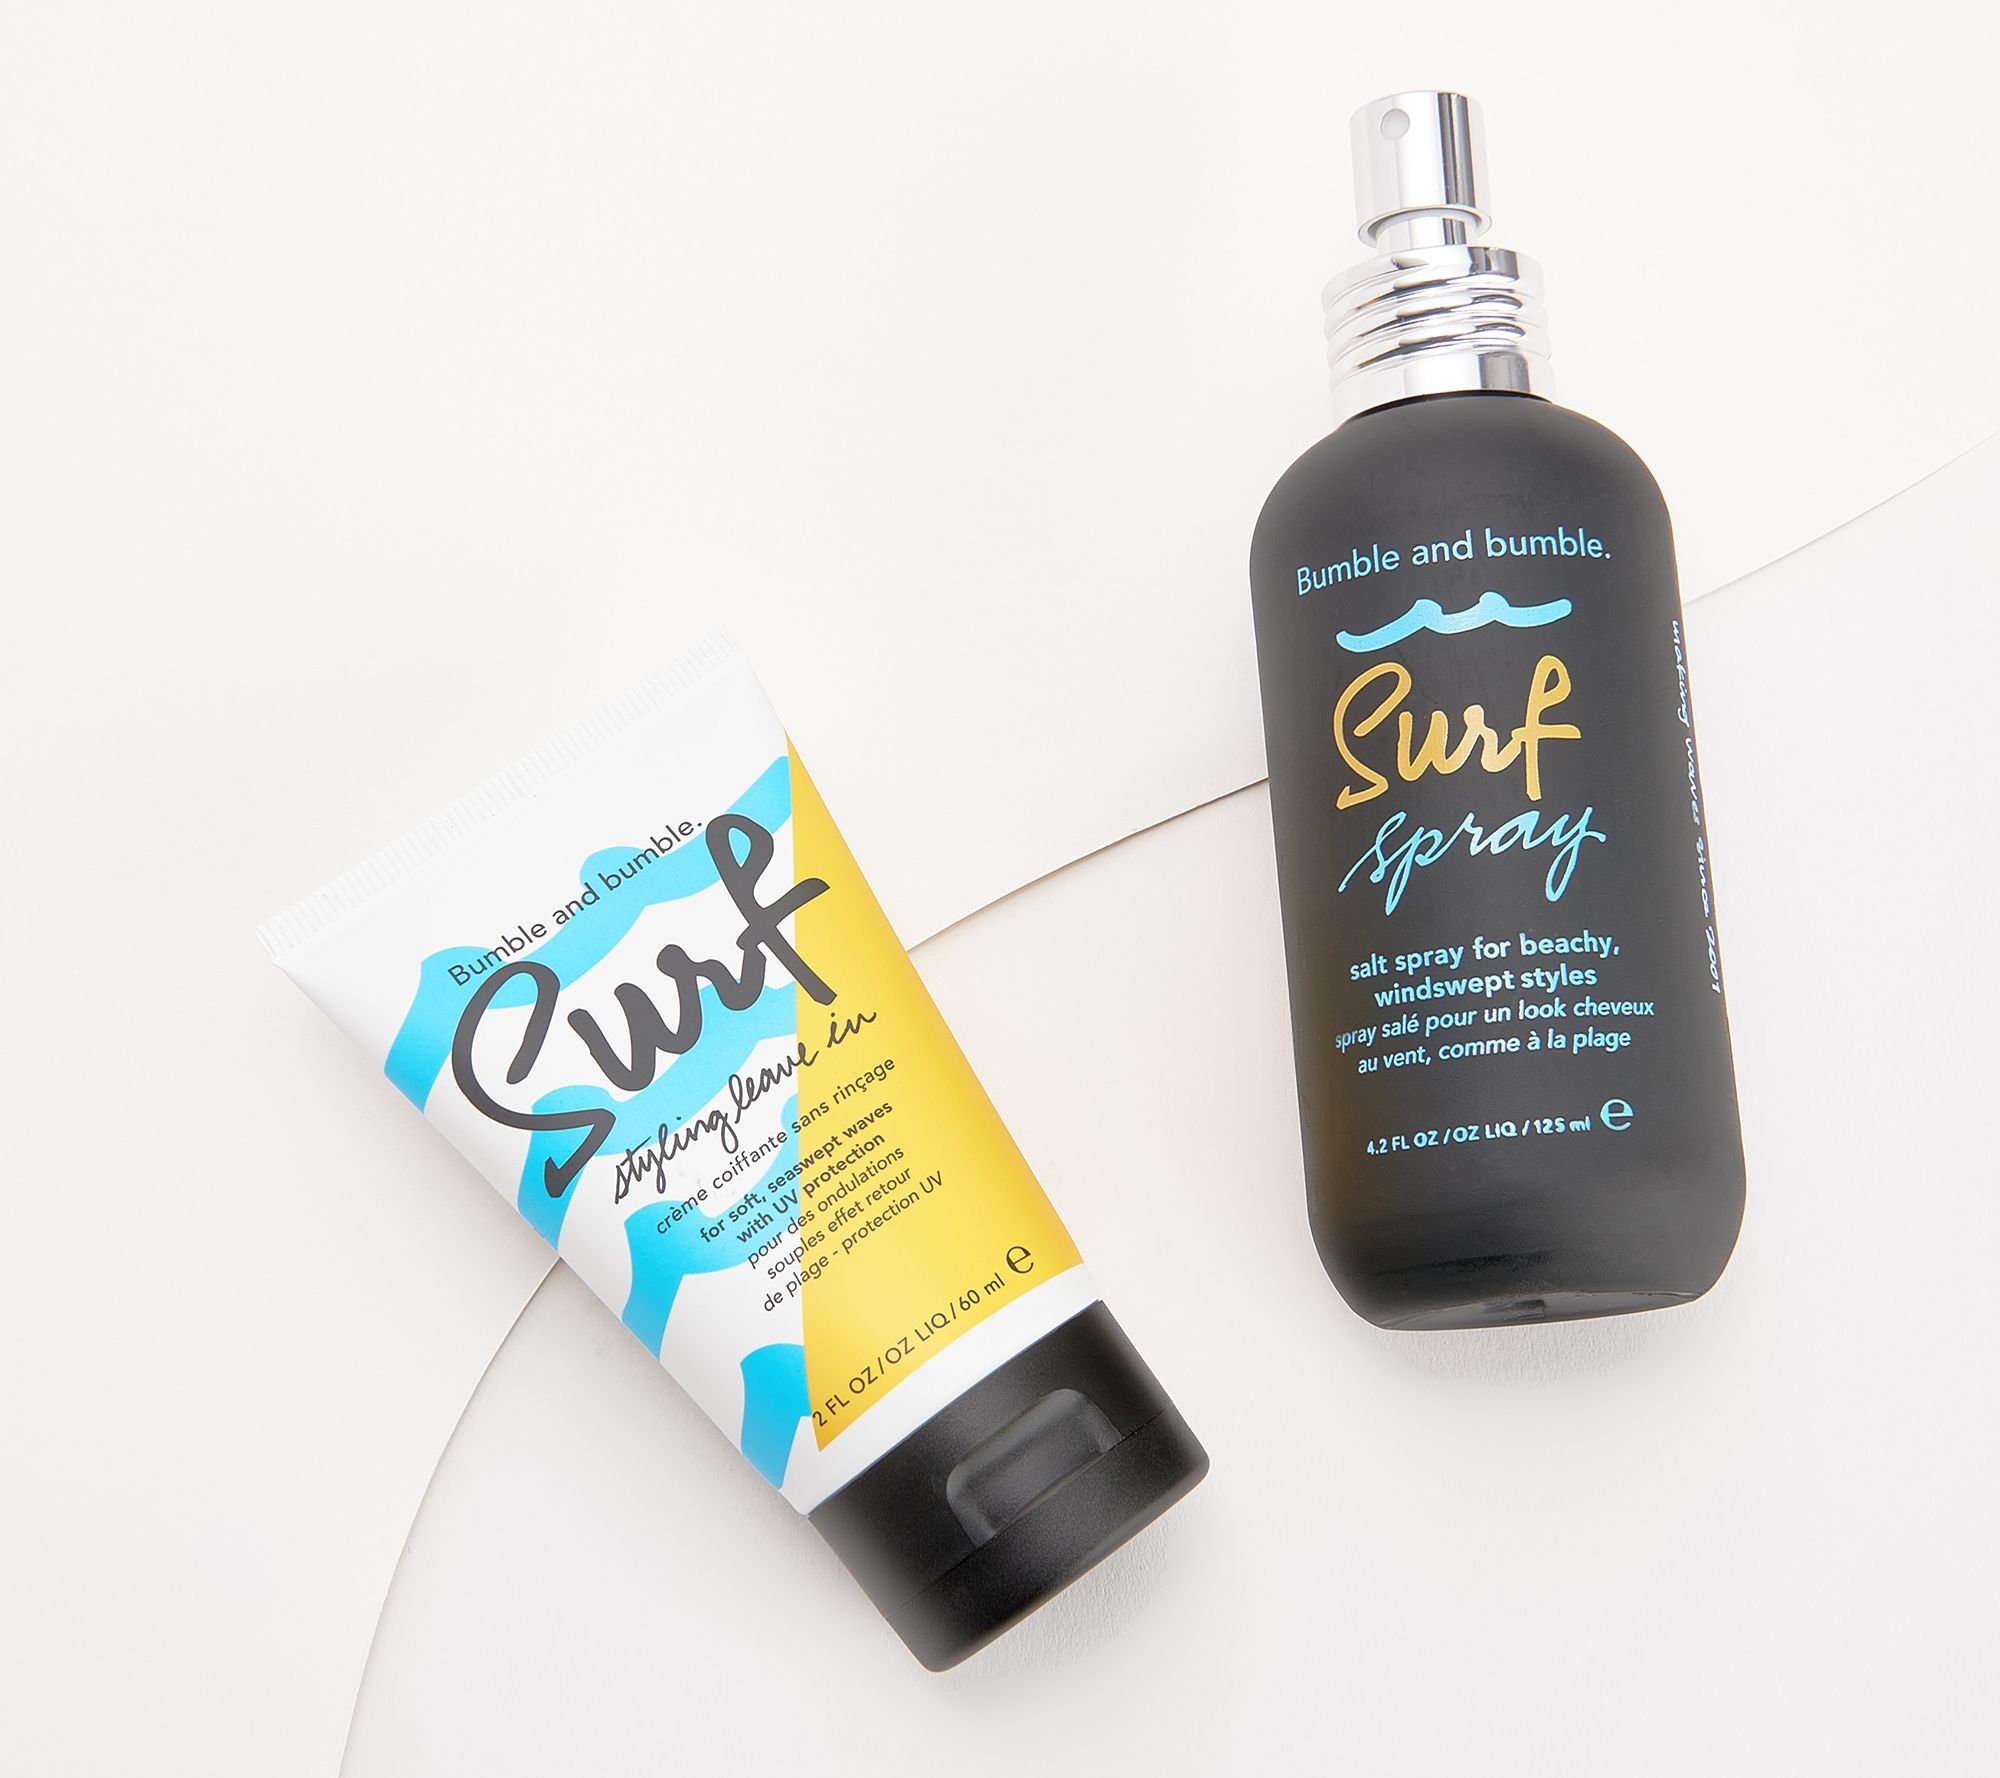 Bumble and Bumble Surf Spray Salt Spray for Beachy Windswept